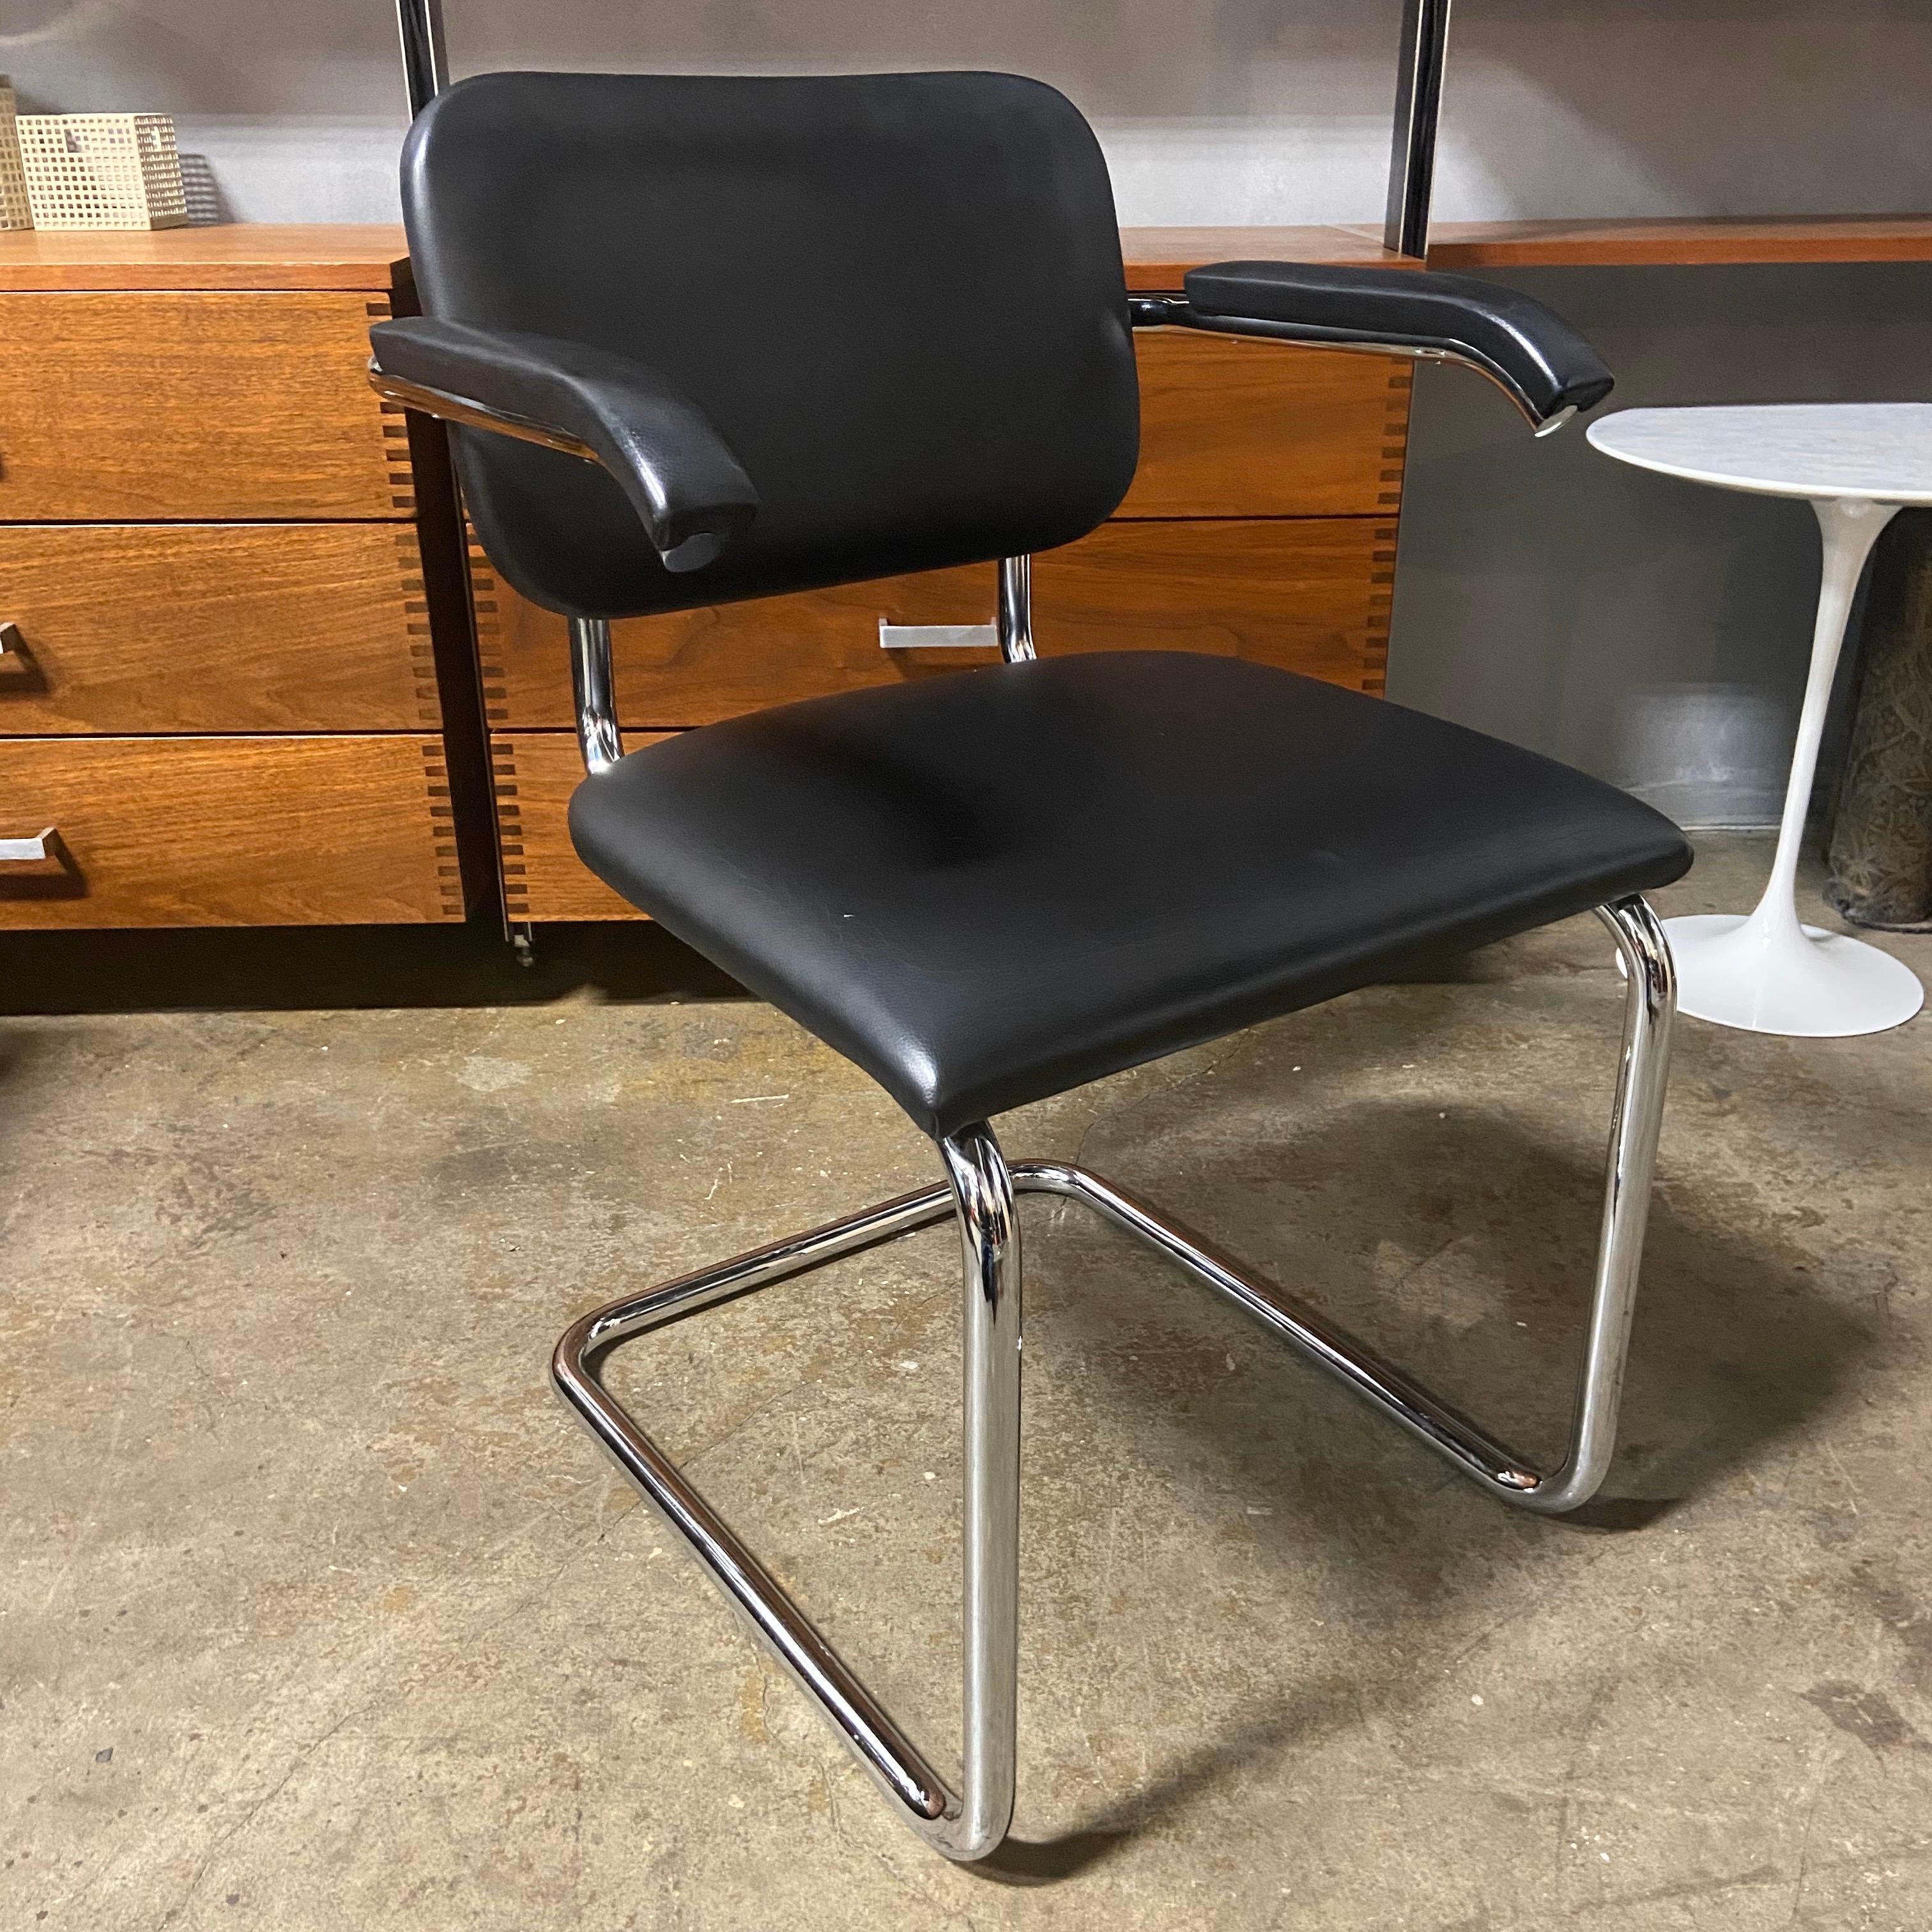 Italian Authentic Midcentury Cesca Chairs by Marcel Breuer for Knoll